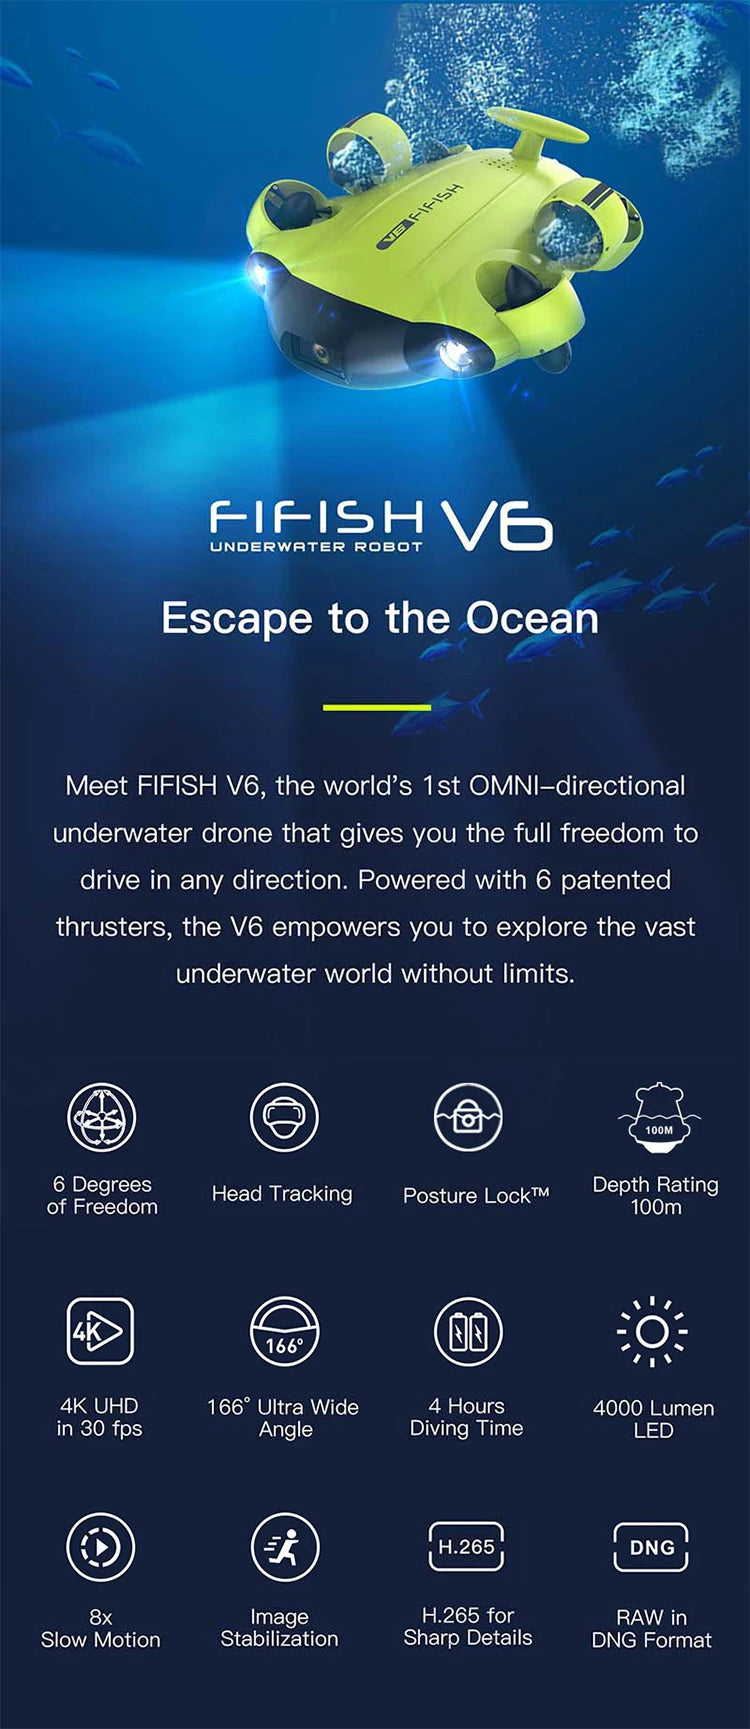 Fifish V6 - professional Underwater Drone, Ist OMNI-directional underwater drone Fifish V6 empowers you to explore the